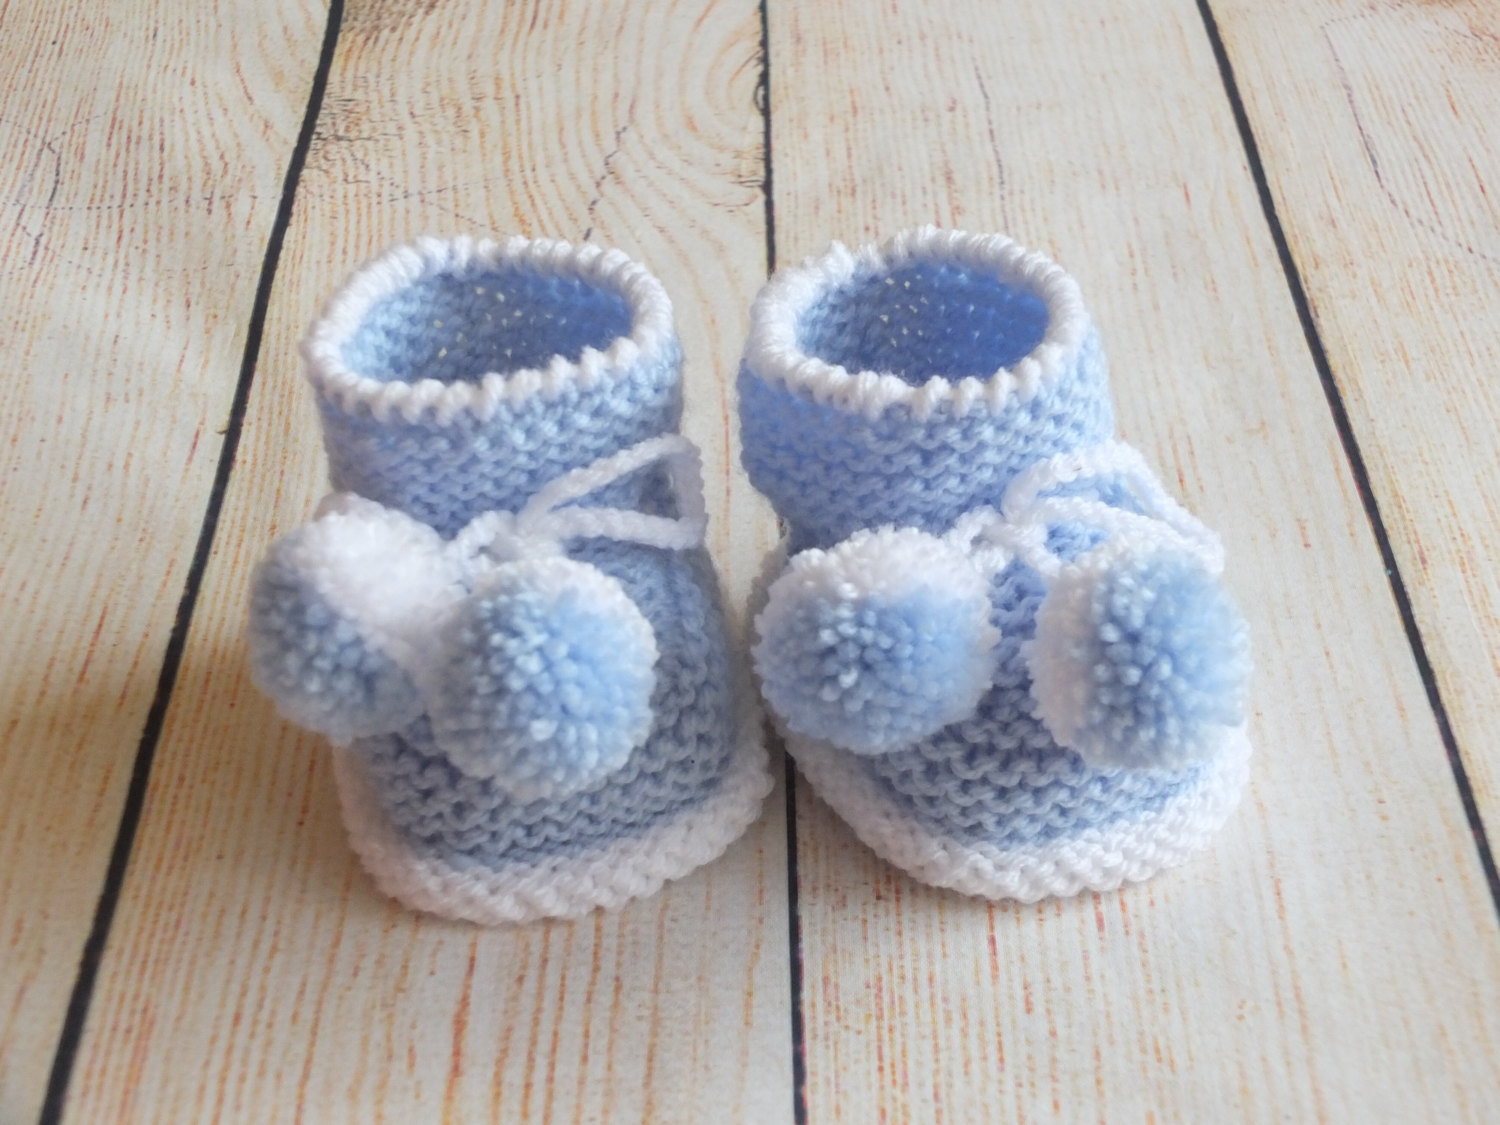 knitted baby booties description. these baby boy booties are hand knitted ... soiurma